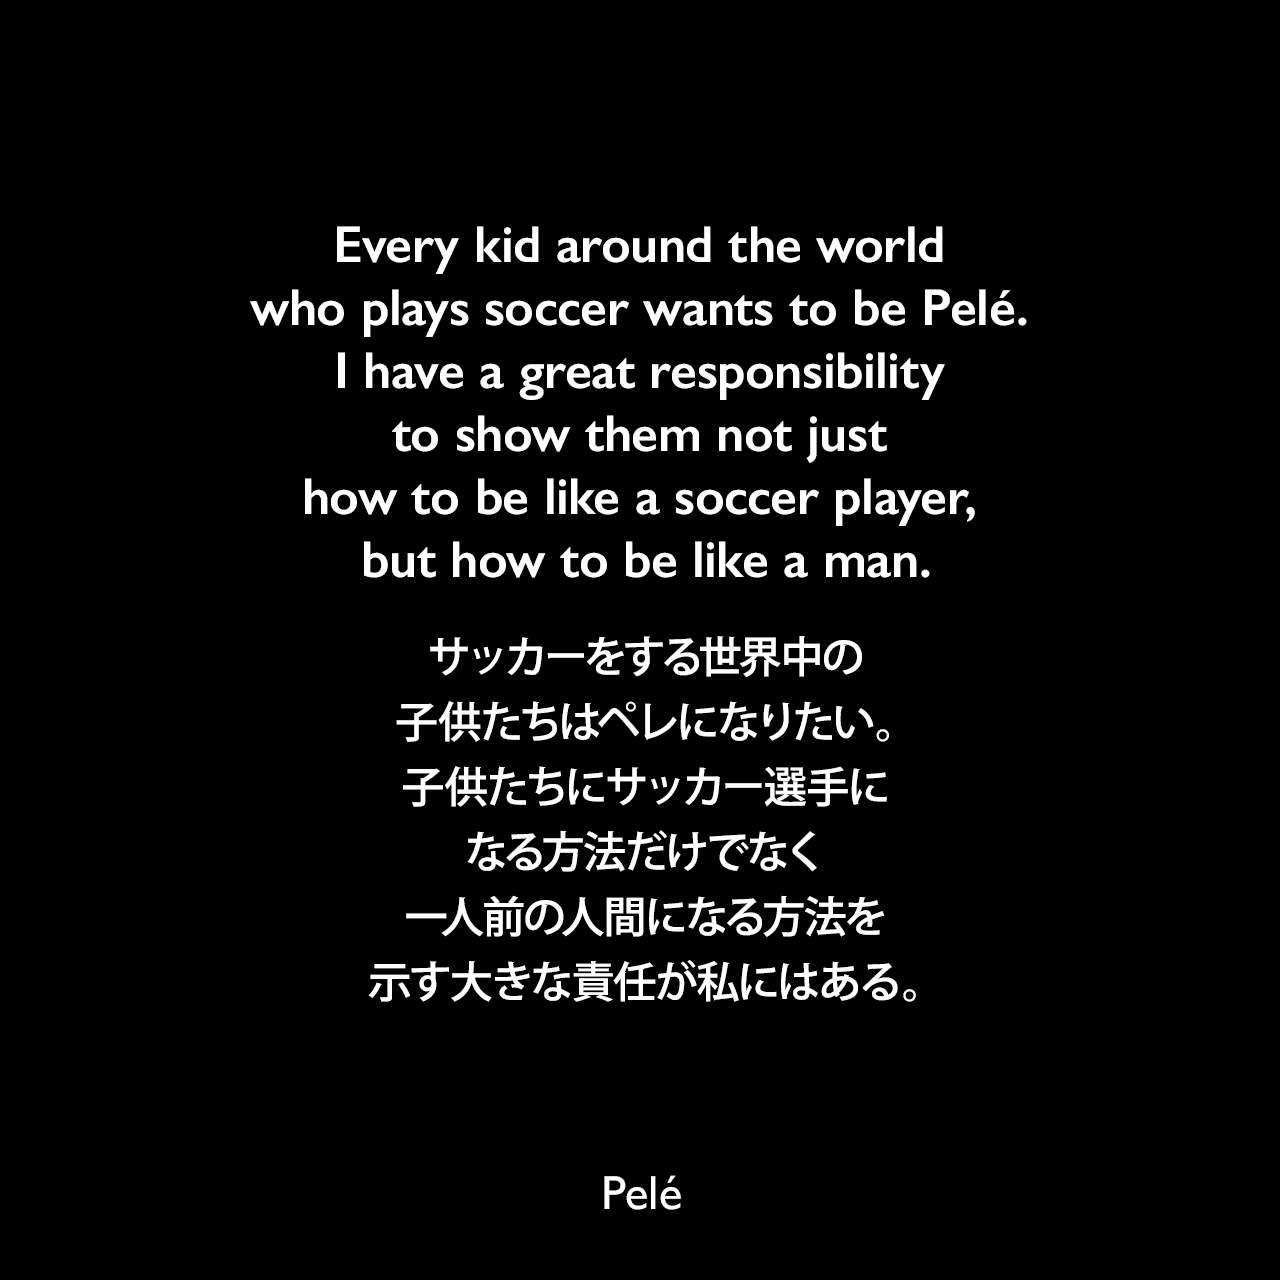 Every kid around the world who plays soccer wants to be Pelé. I have a great responsibility to show them not just how to be like a soccer player, but how to be like a man.サッカーをする世界中の子供たちはペレになりたい。子供たちにサッカー選手になる方法だけでなく、一人前の人間になる方法を示す大きな責任が私にはある。- Sports Illustrated「SI Flashback: Soccer's greatest genius」より（1999年）Pelé